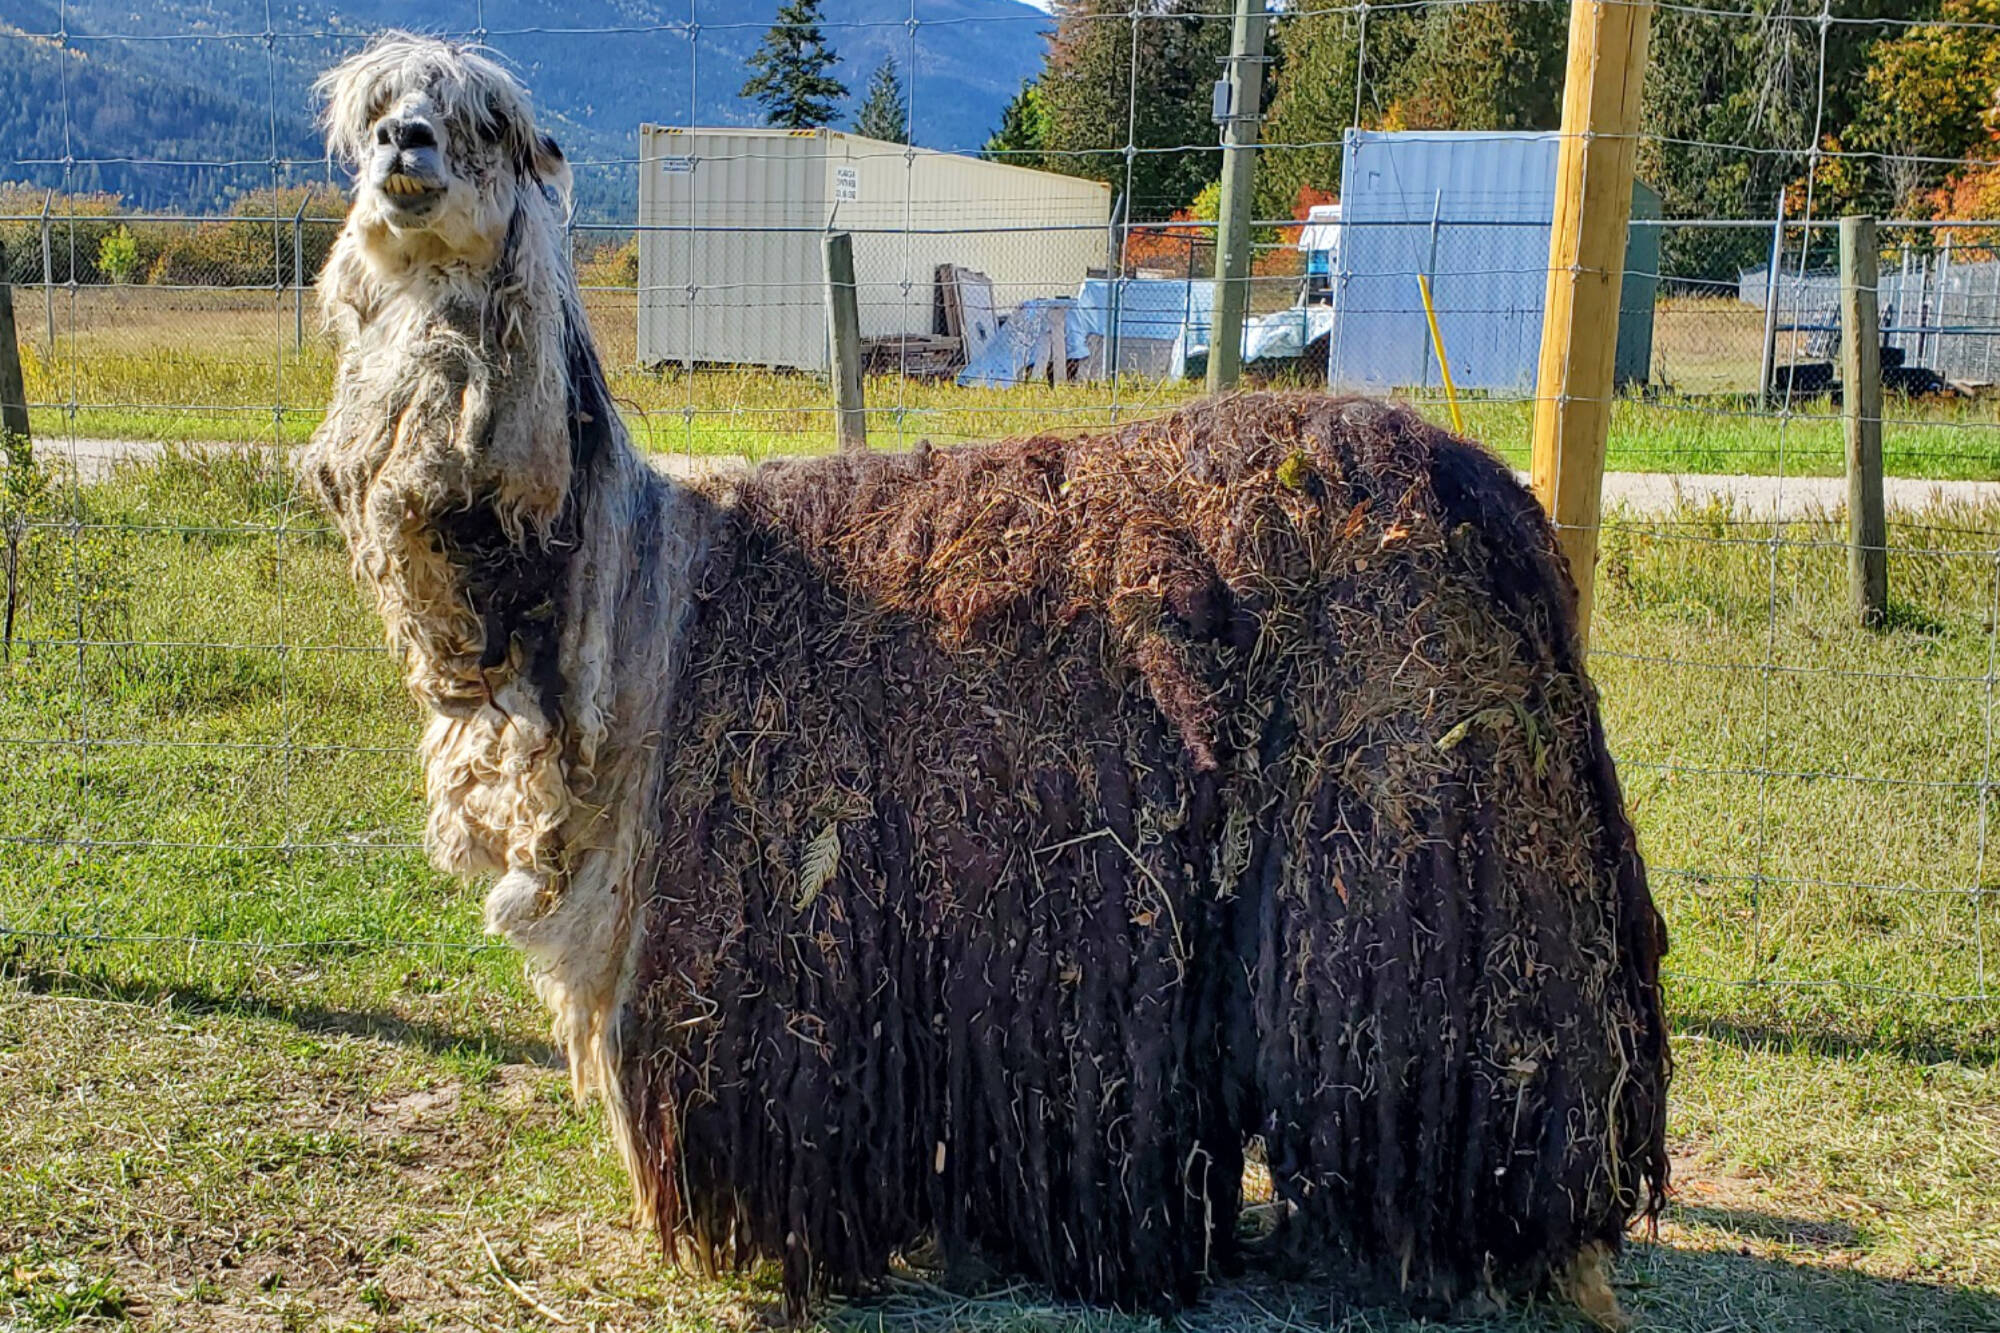 Eddie the alpaca was saved by The Llama Sanctuary as he suffered under an overgrown fleece. (The Llama Sanctuary/Facebook)